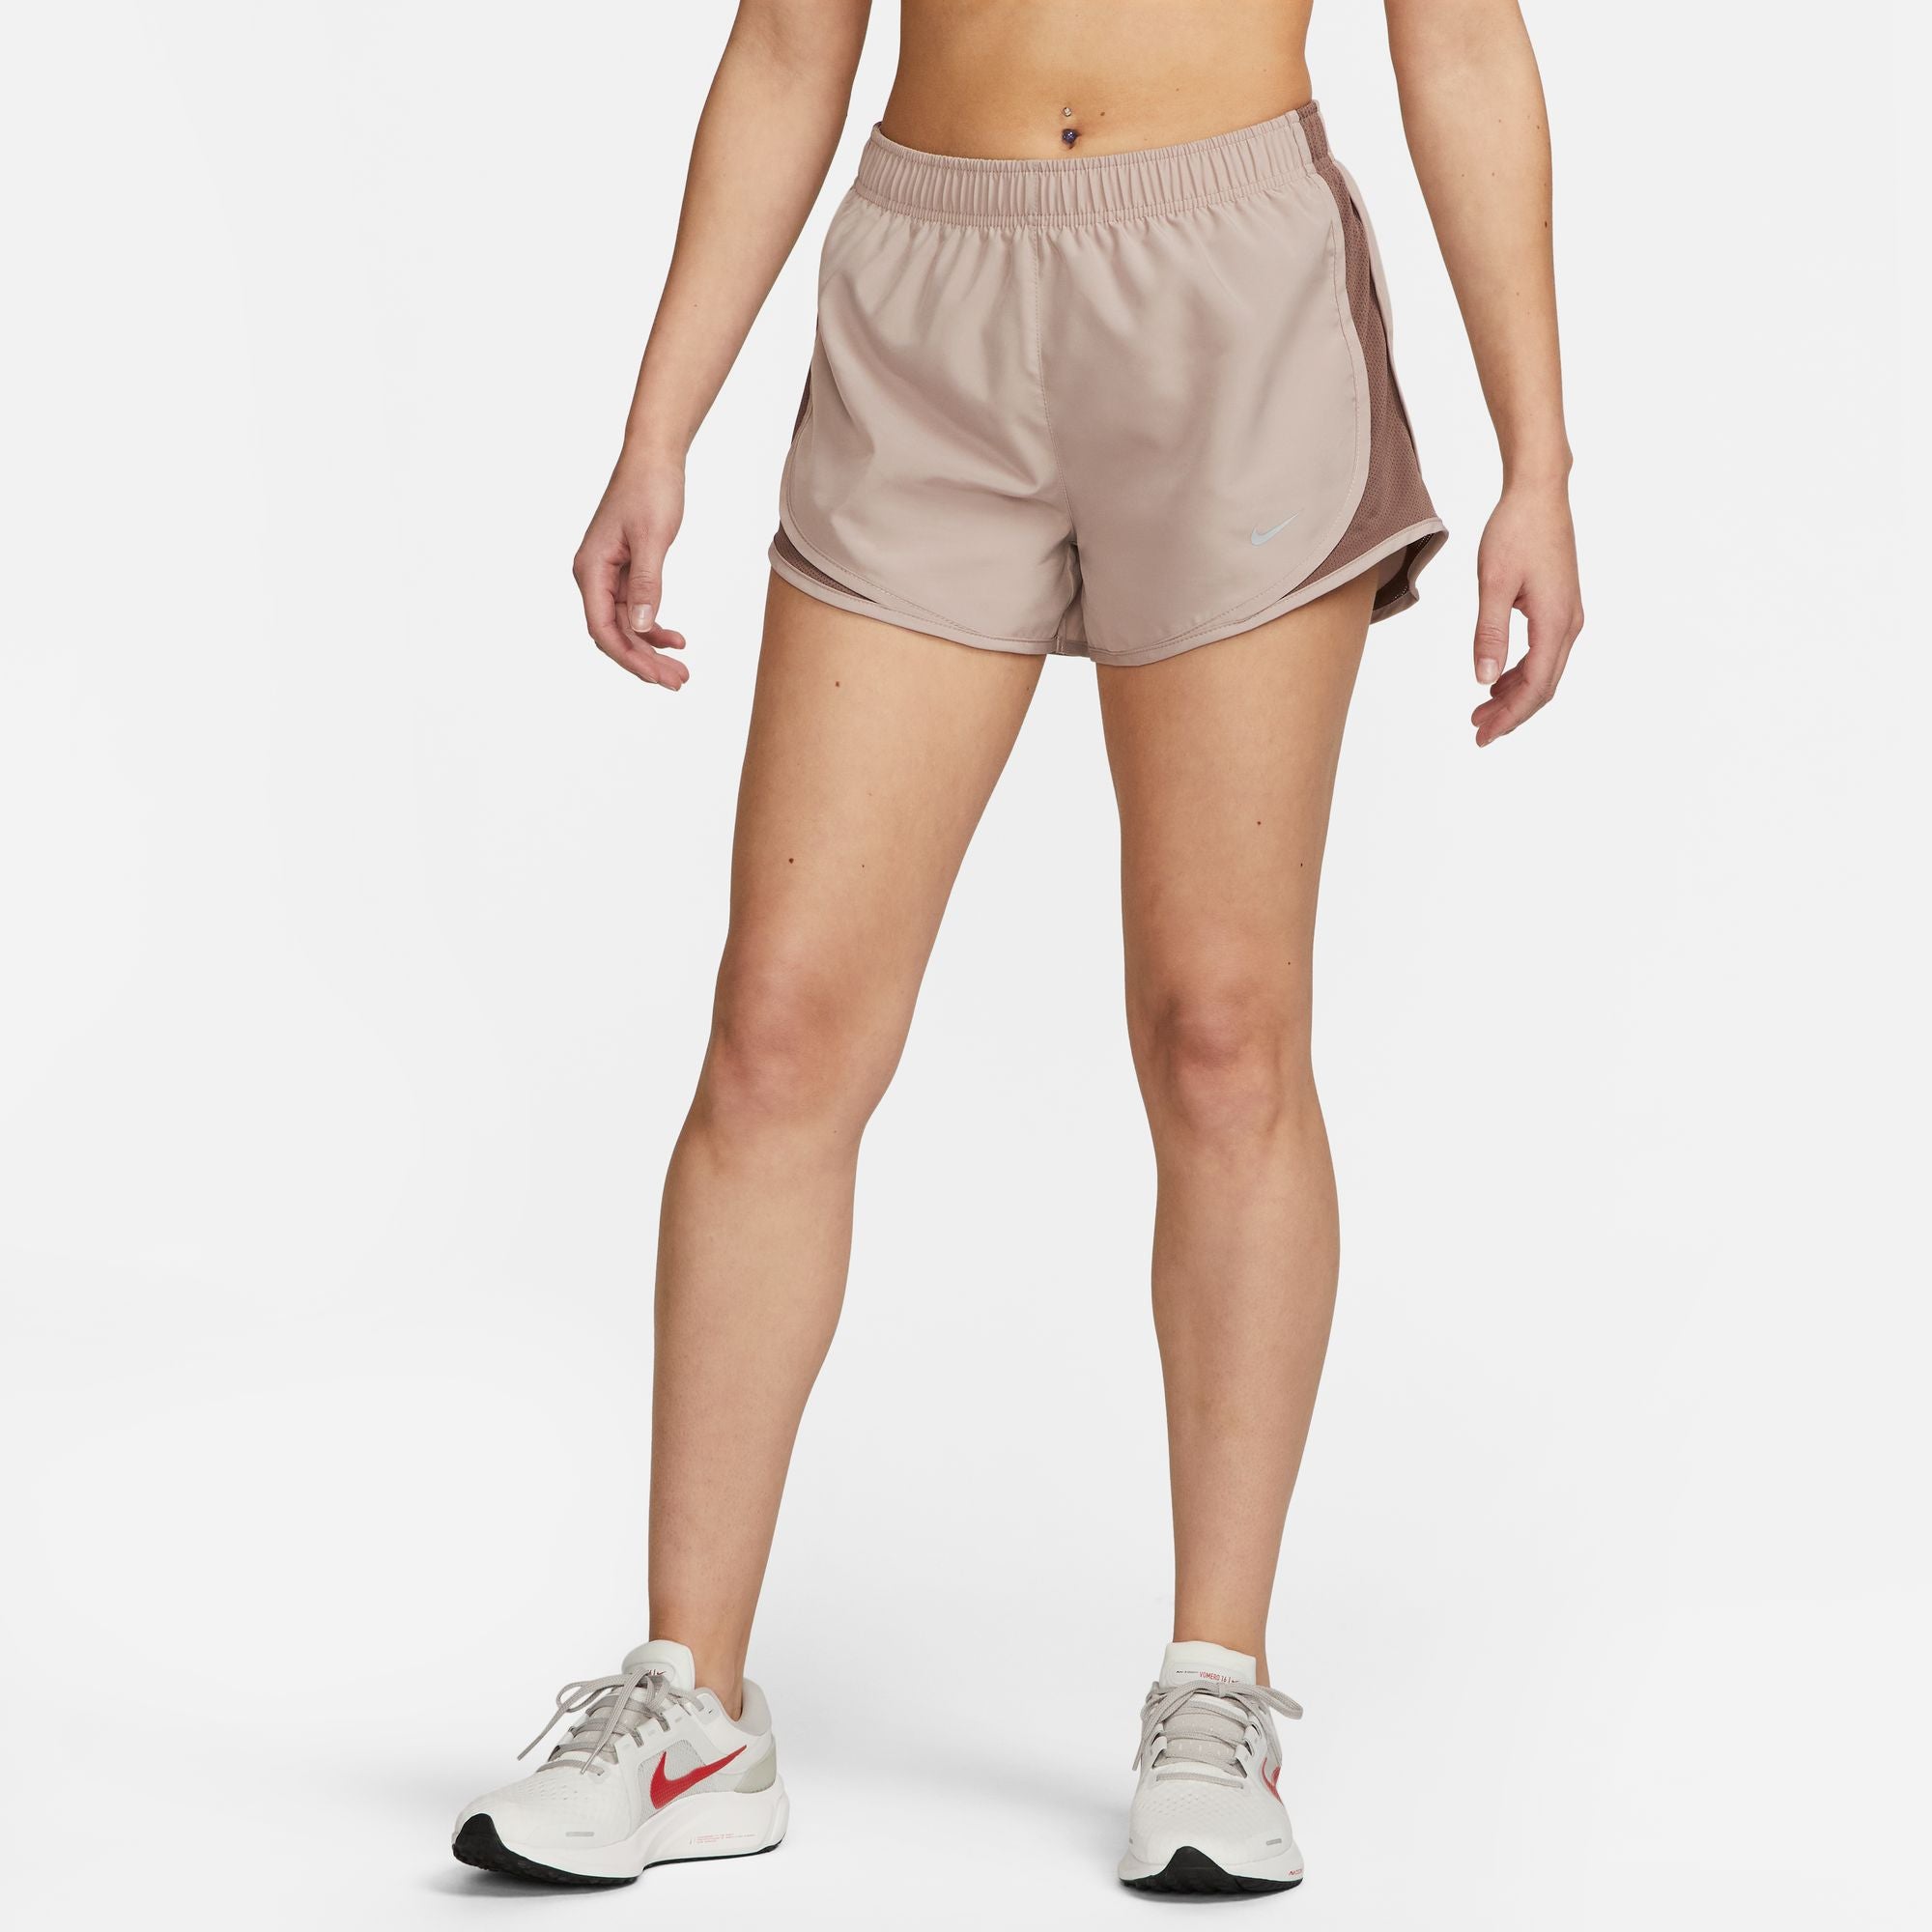 NIKE TEMPO WOMENS RUNNING SHORTS DIFFUSED TAUPE/PLUM ECLIPSE/WOLF GREY ...